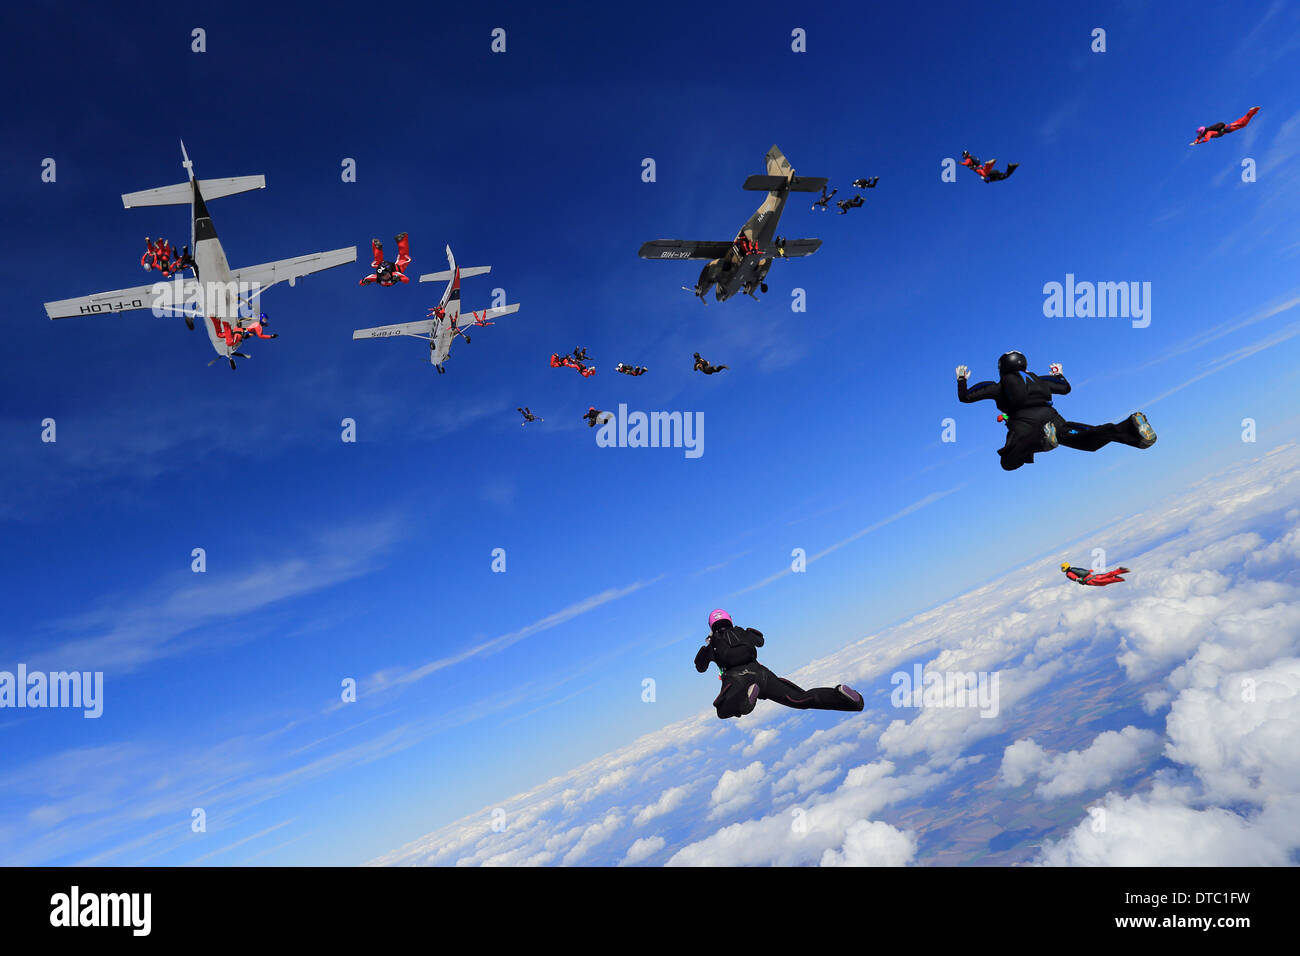 Large formation skydiving exit from multiple aircraft Stock Photo